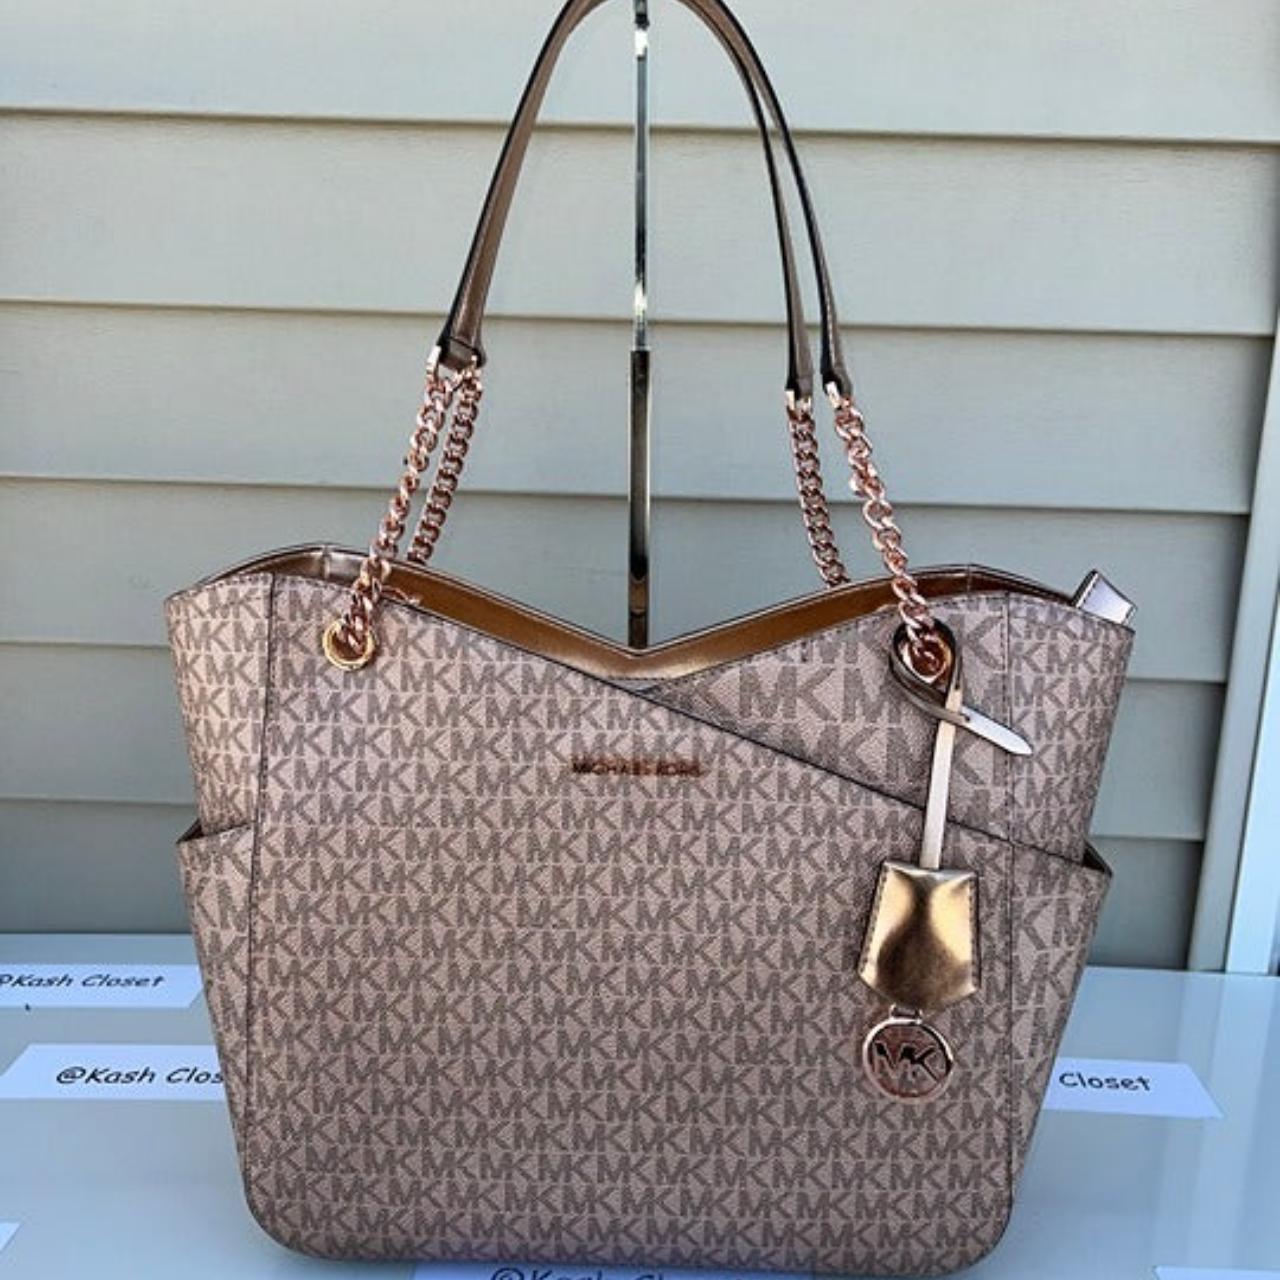 Michael Kors Purse - clothing & accessories - by owner - apparel sale -  craigslist